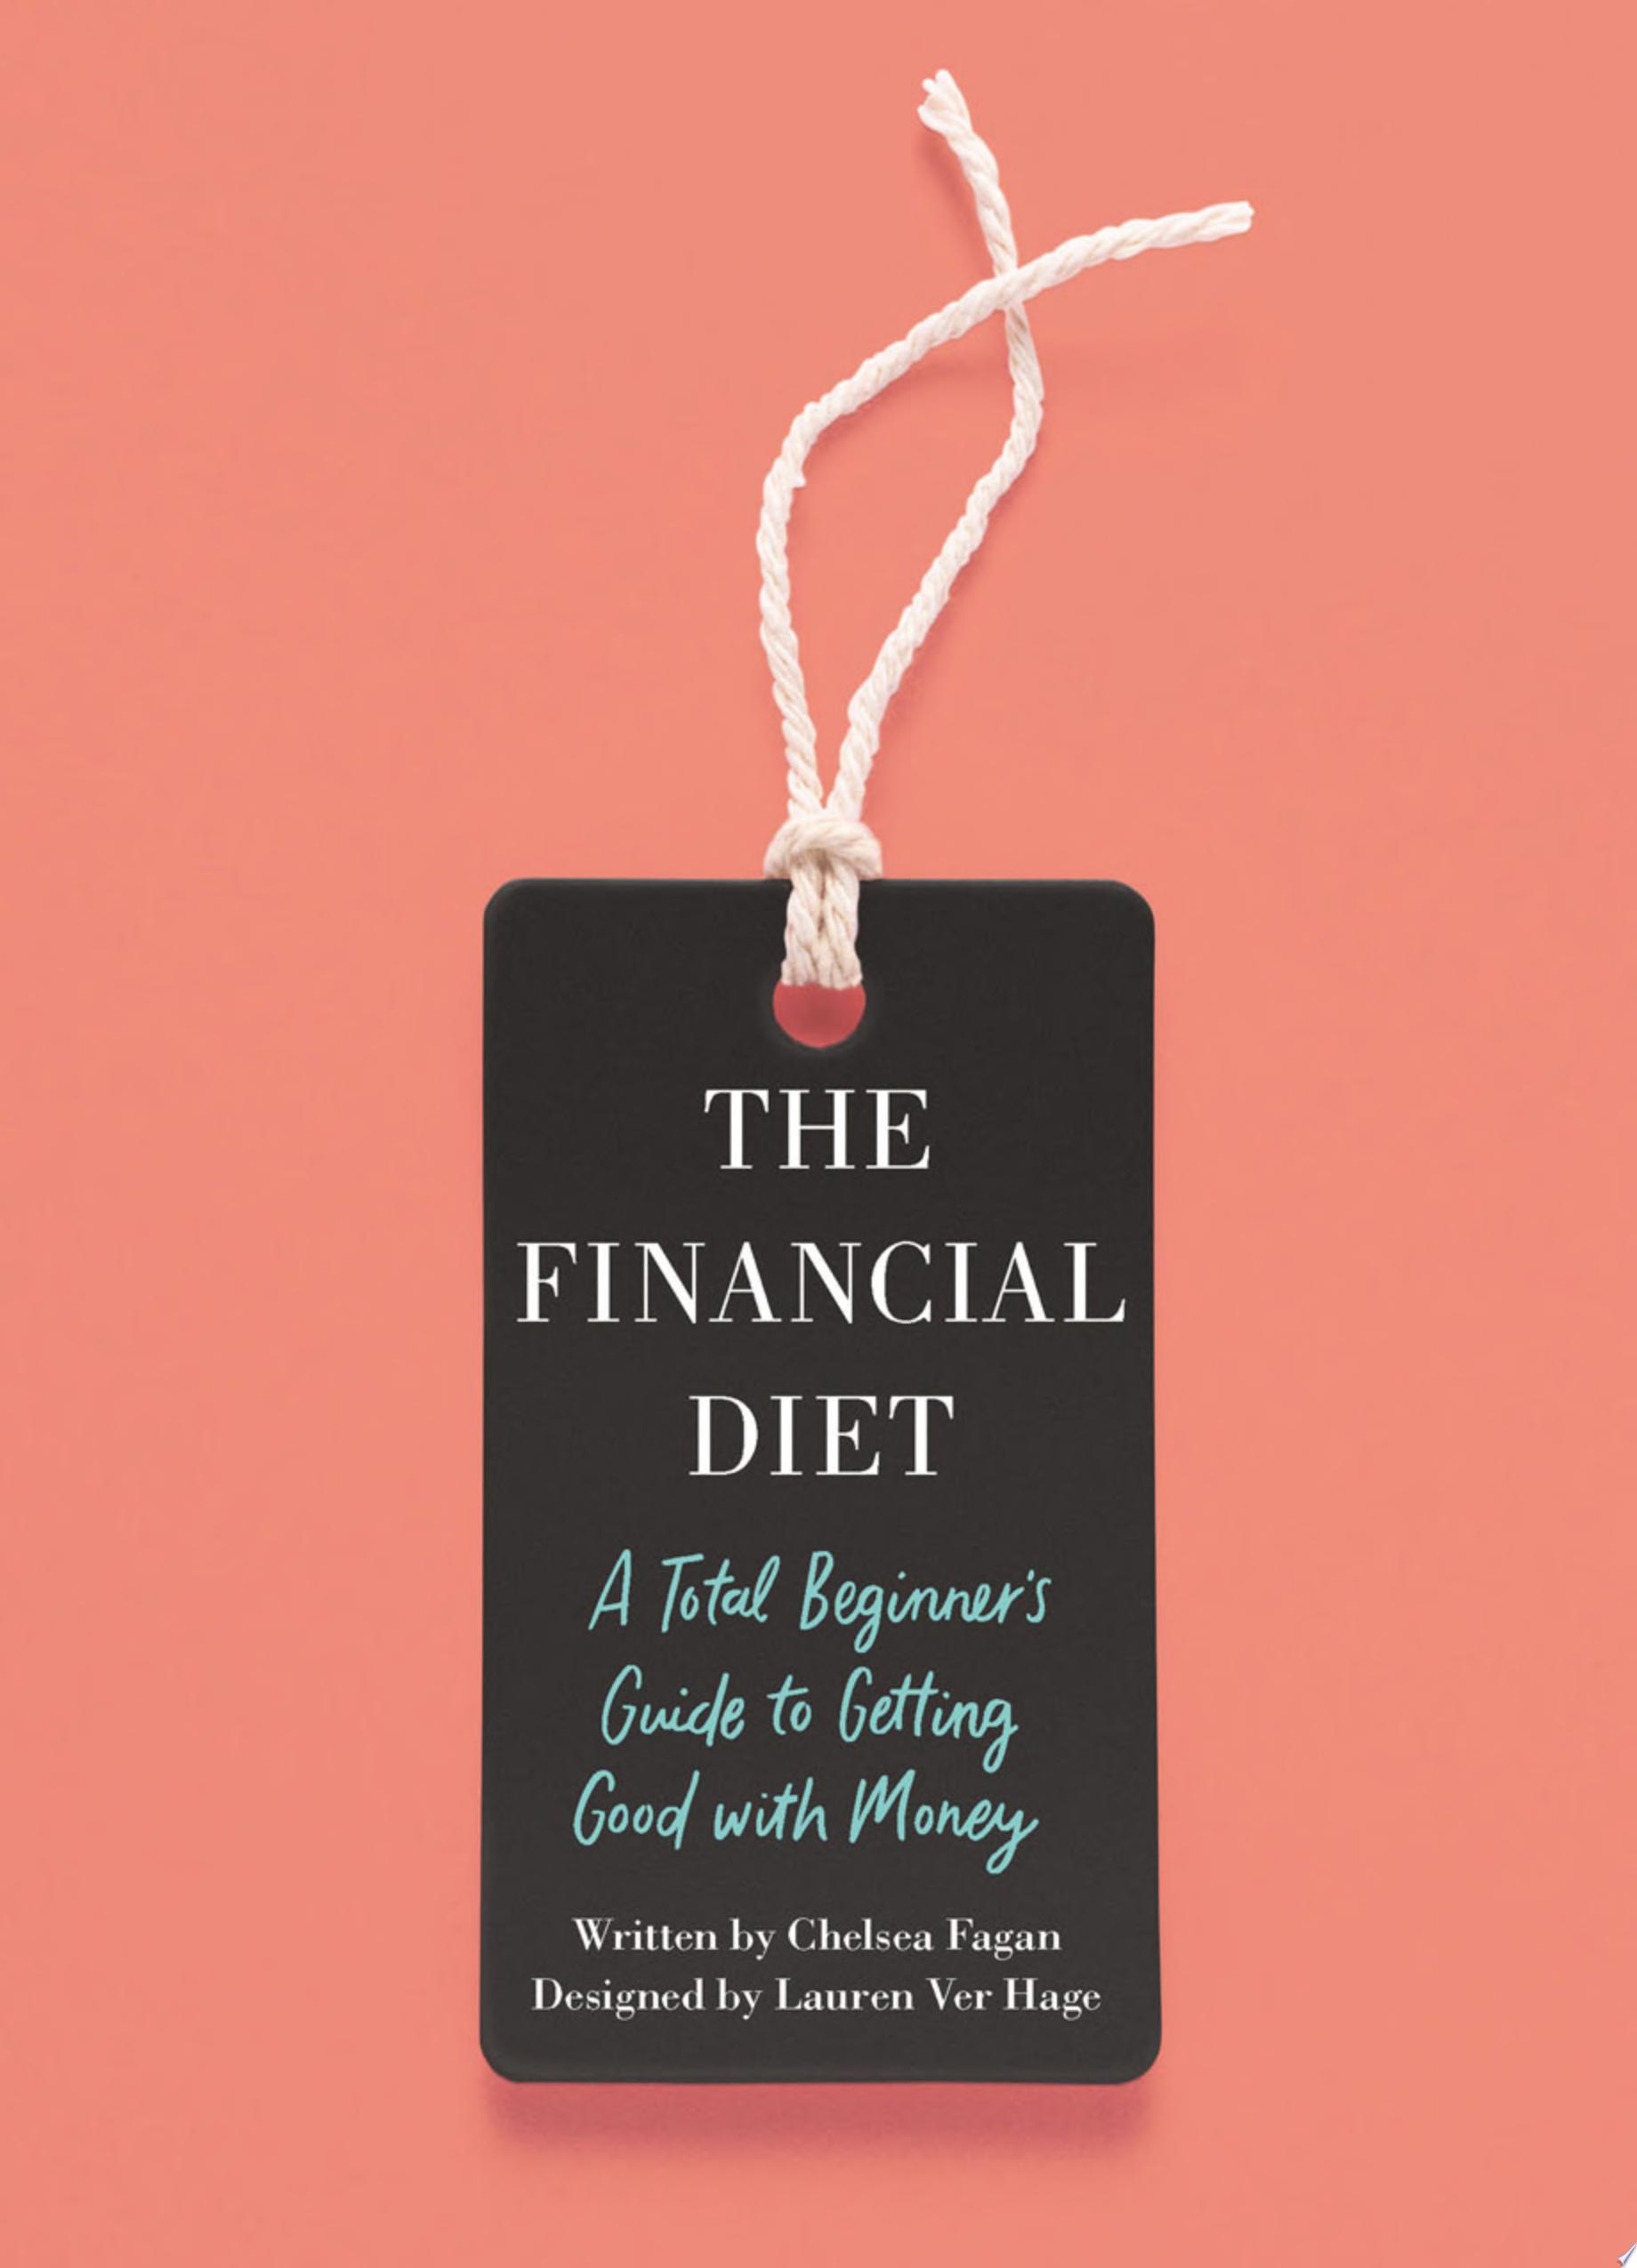 Image for "The Financial Diet"